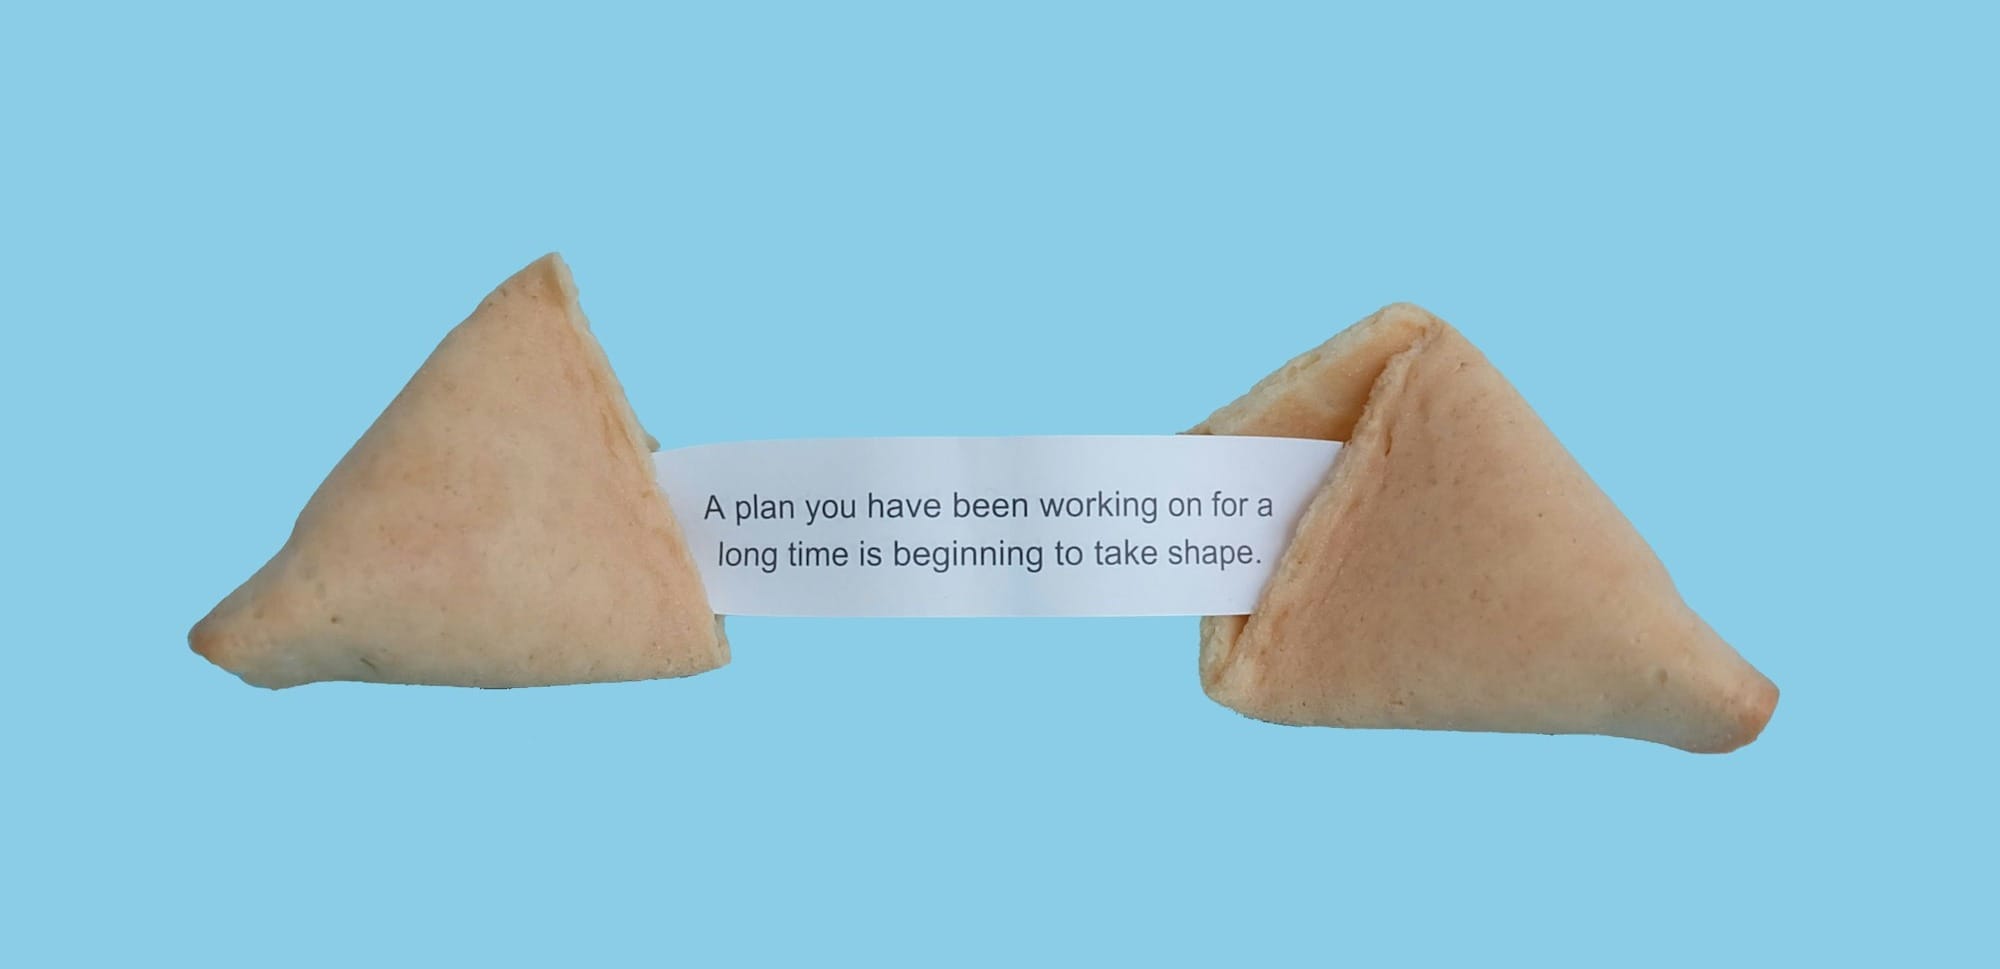 Fortune cookie message reads: A plan you have been working on for a long time is beginning to take shape